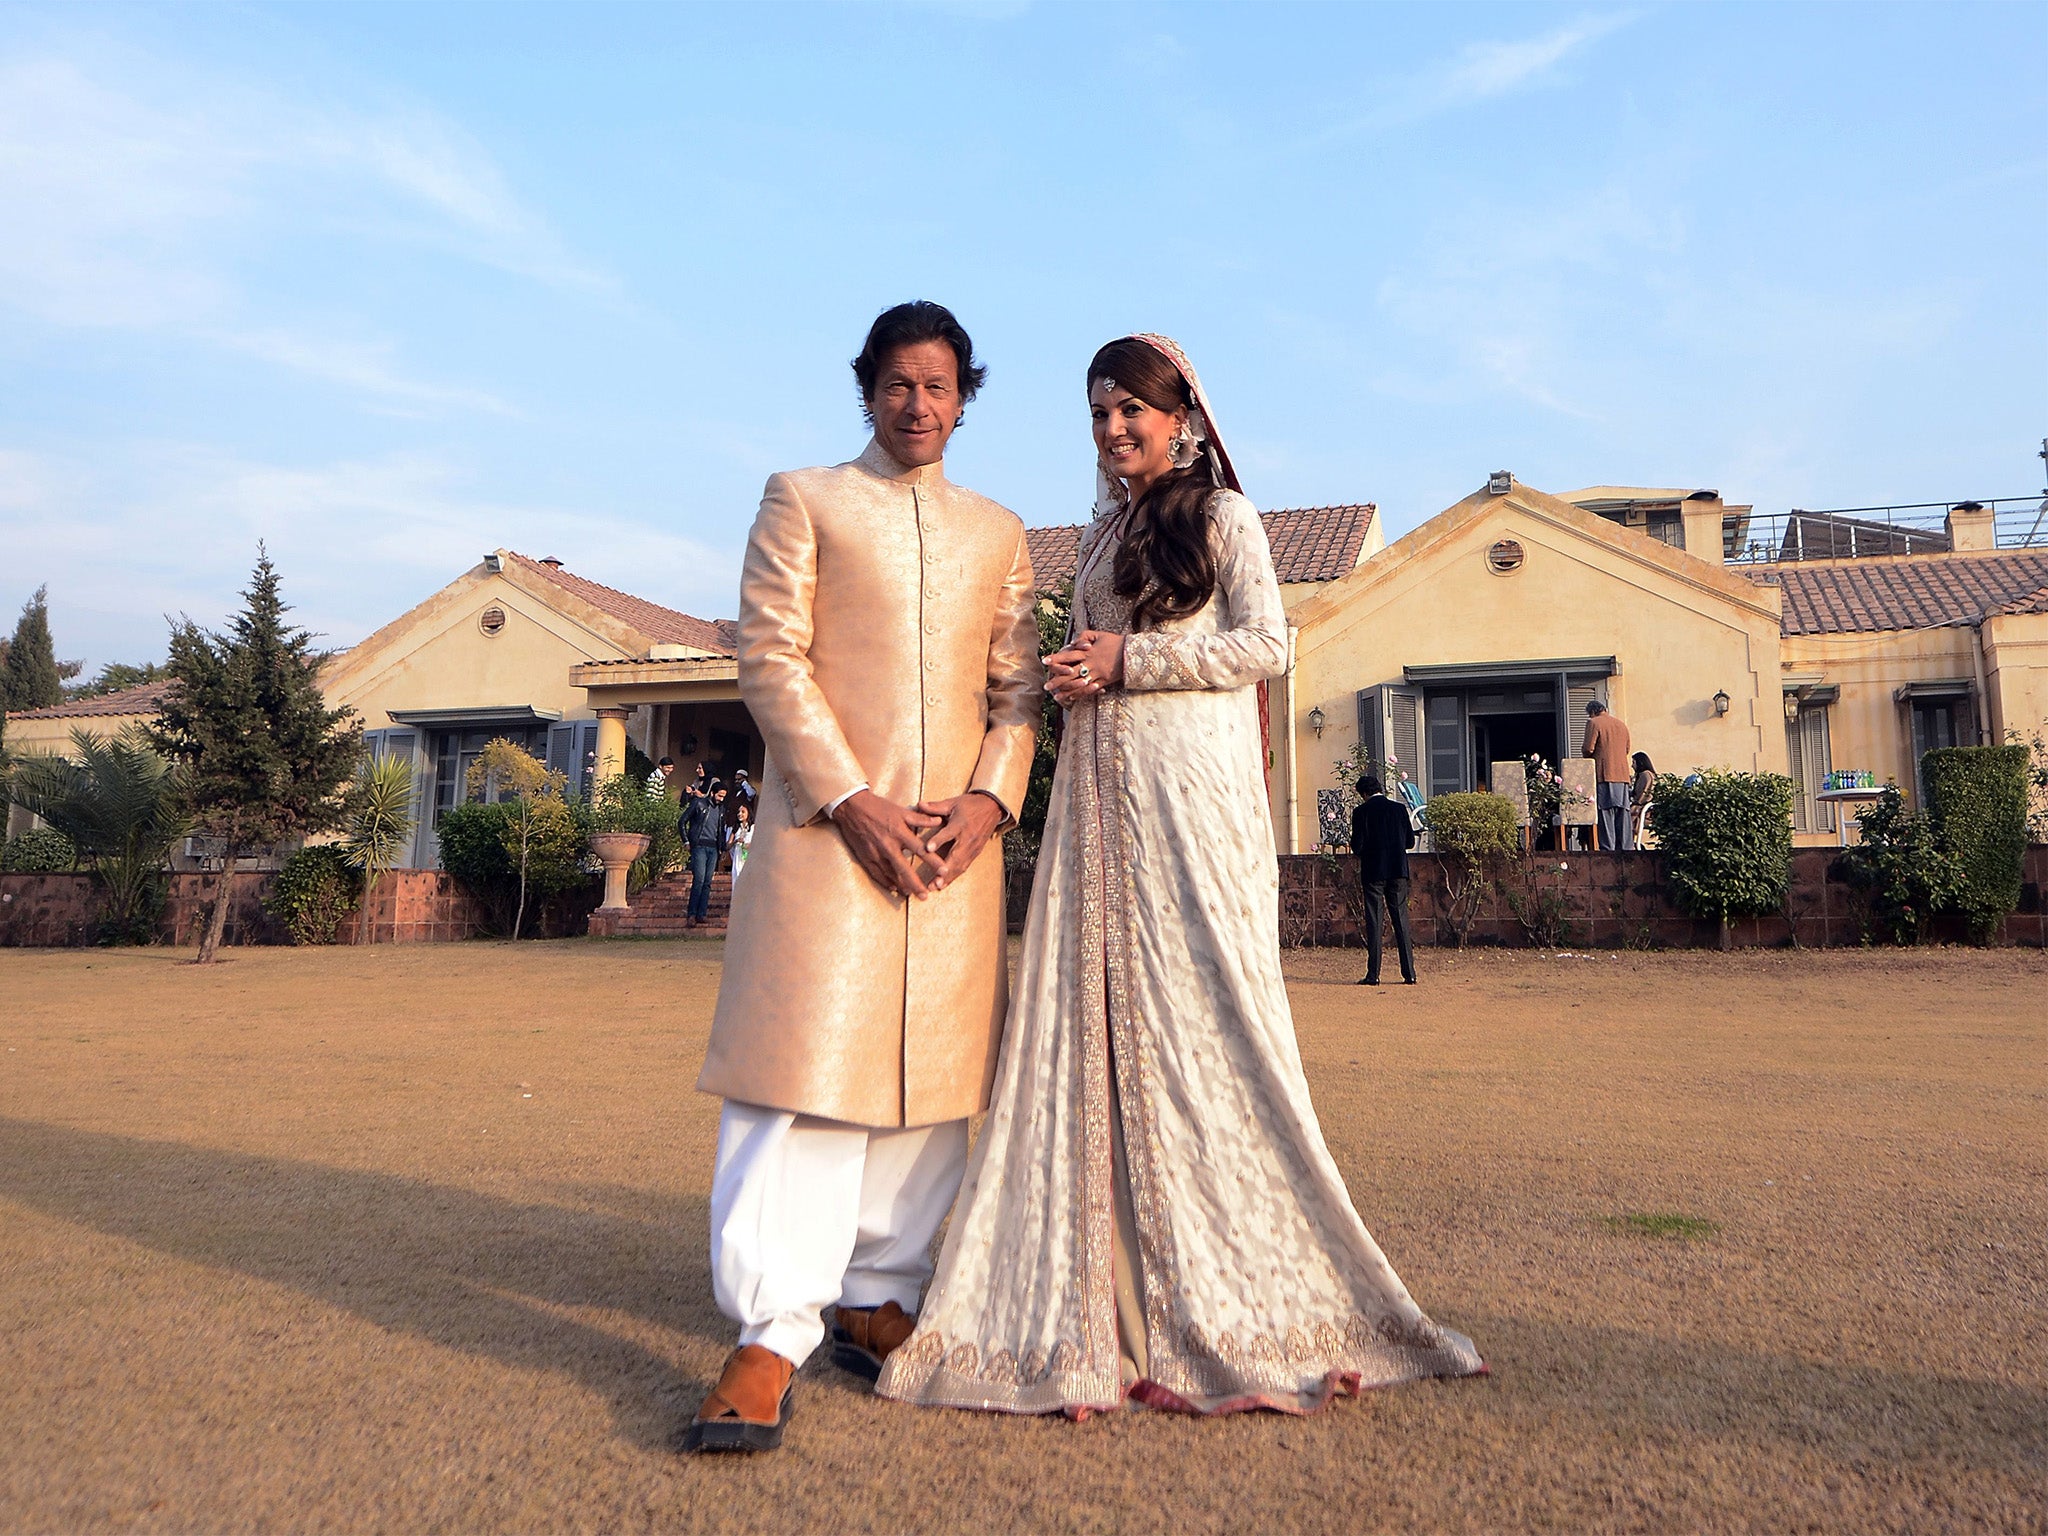 Imran Khan, 62, married 41-year-old Reham Khan, previously a BBC weather host and a divorced mother of three in January this year in a simple ceremony at his Islamabad home.